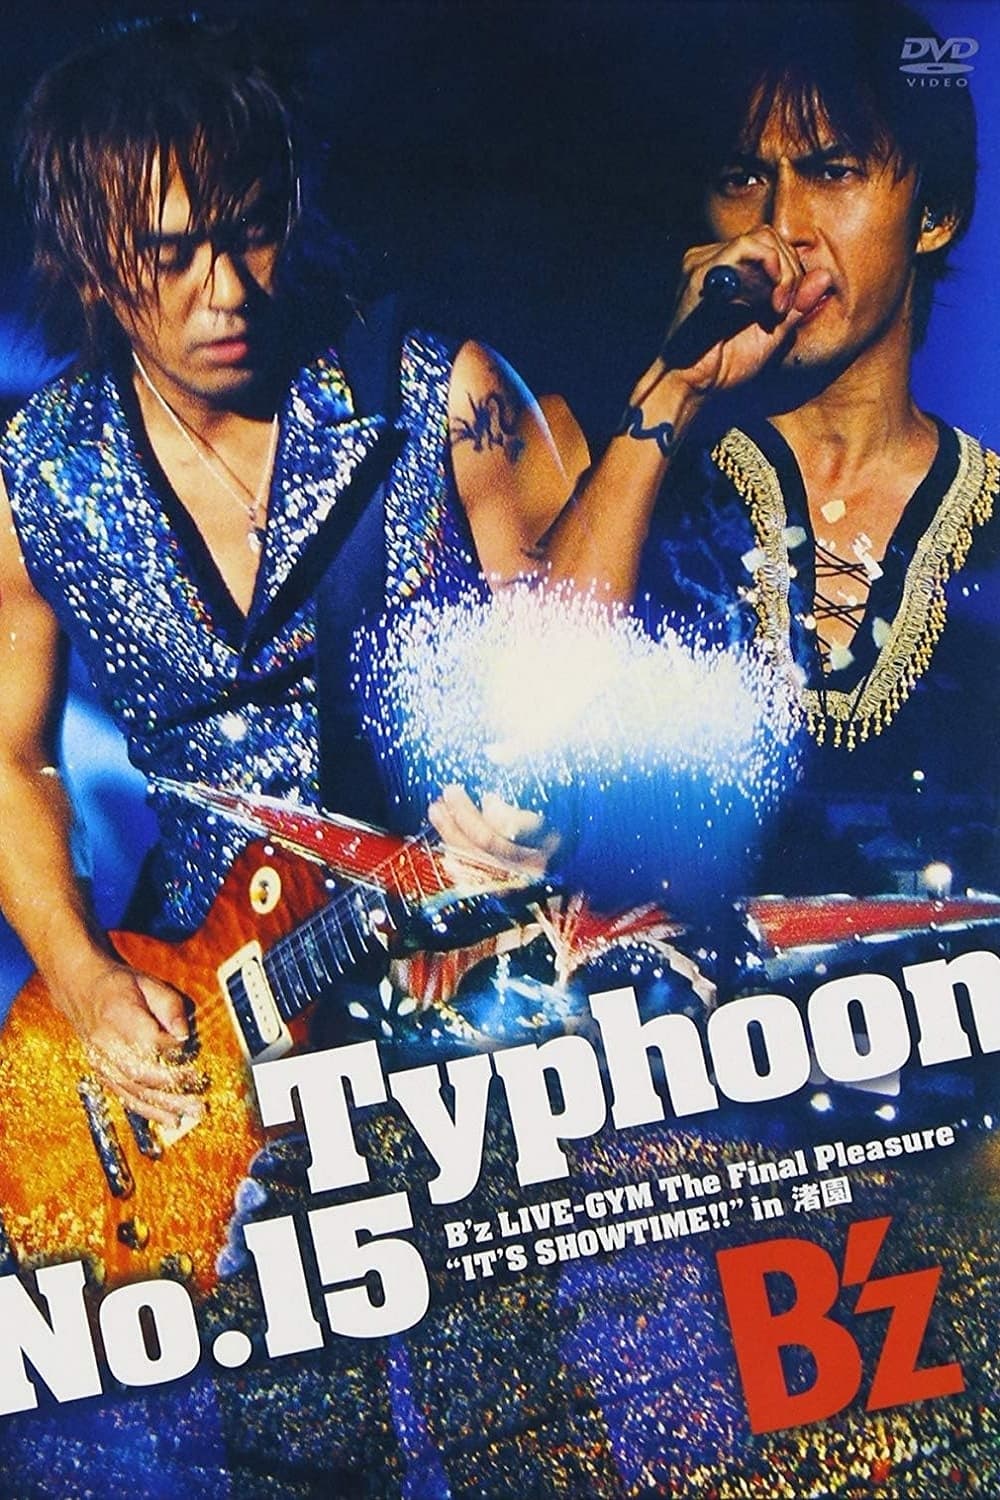 Typhoon No.15 〜B'z LIVE-GYM The Final Pleasure "IT'S SHOWTIME!!" in 渚園〜